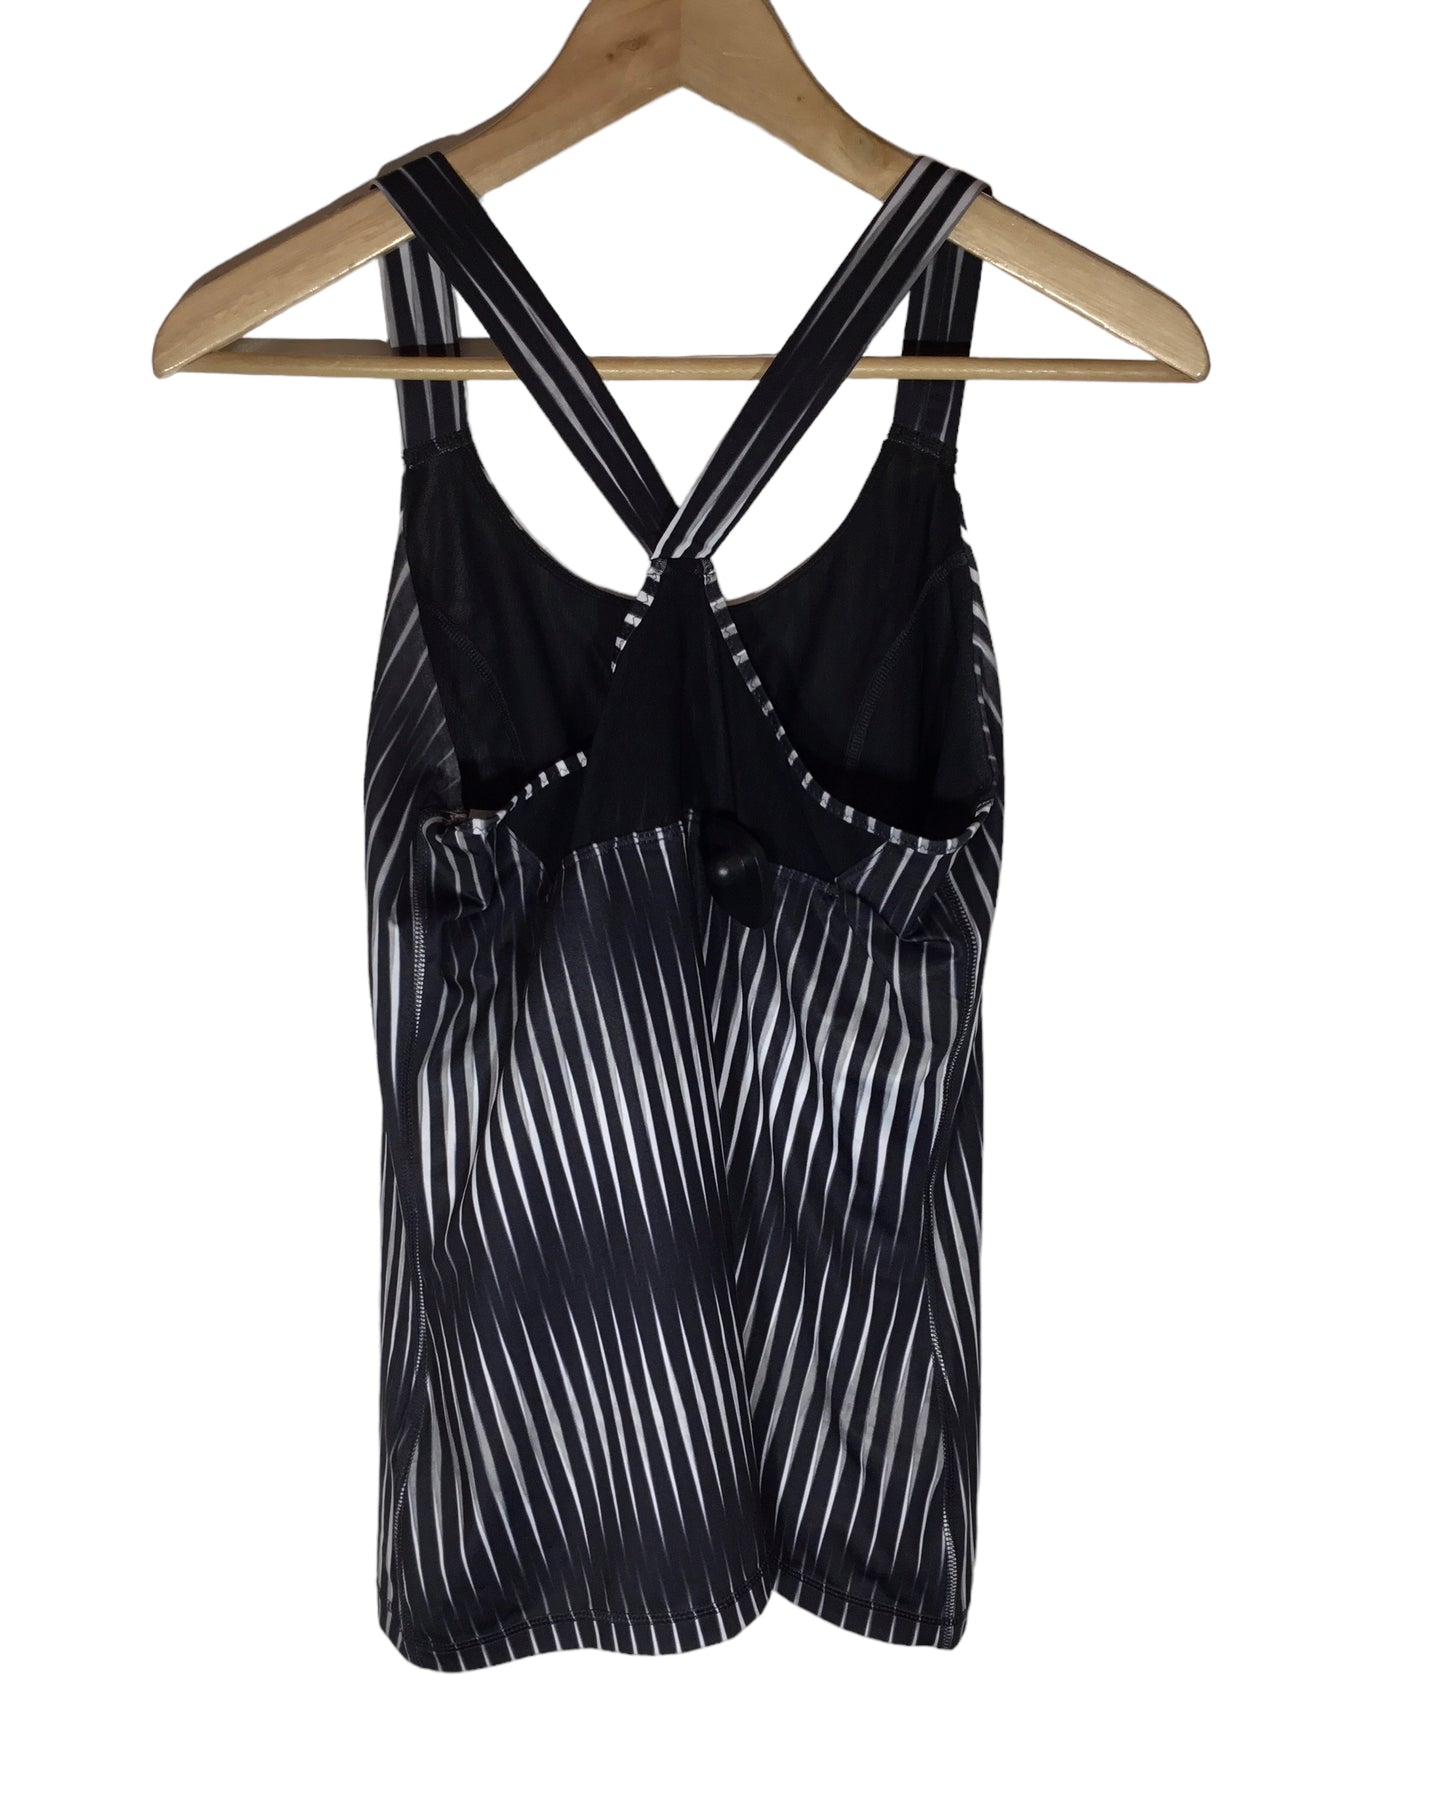 Athletic Tank Top By Ivy Park  Size: L